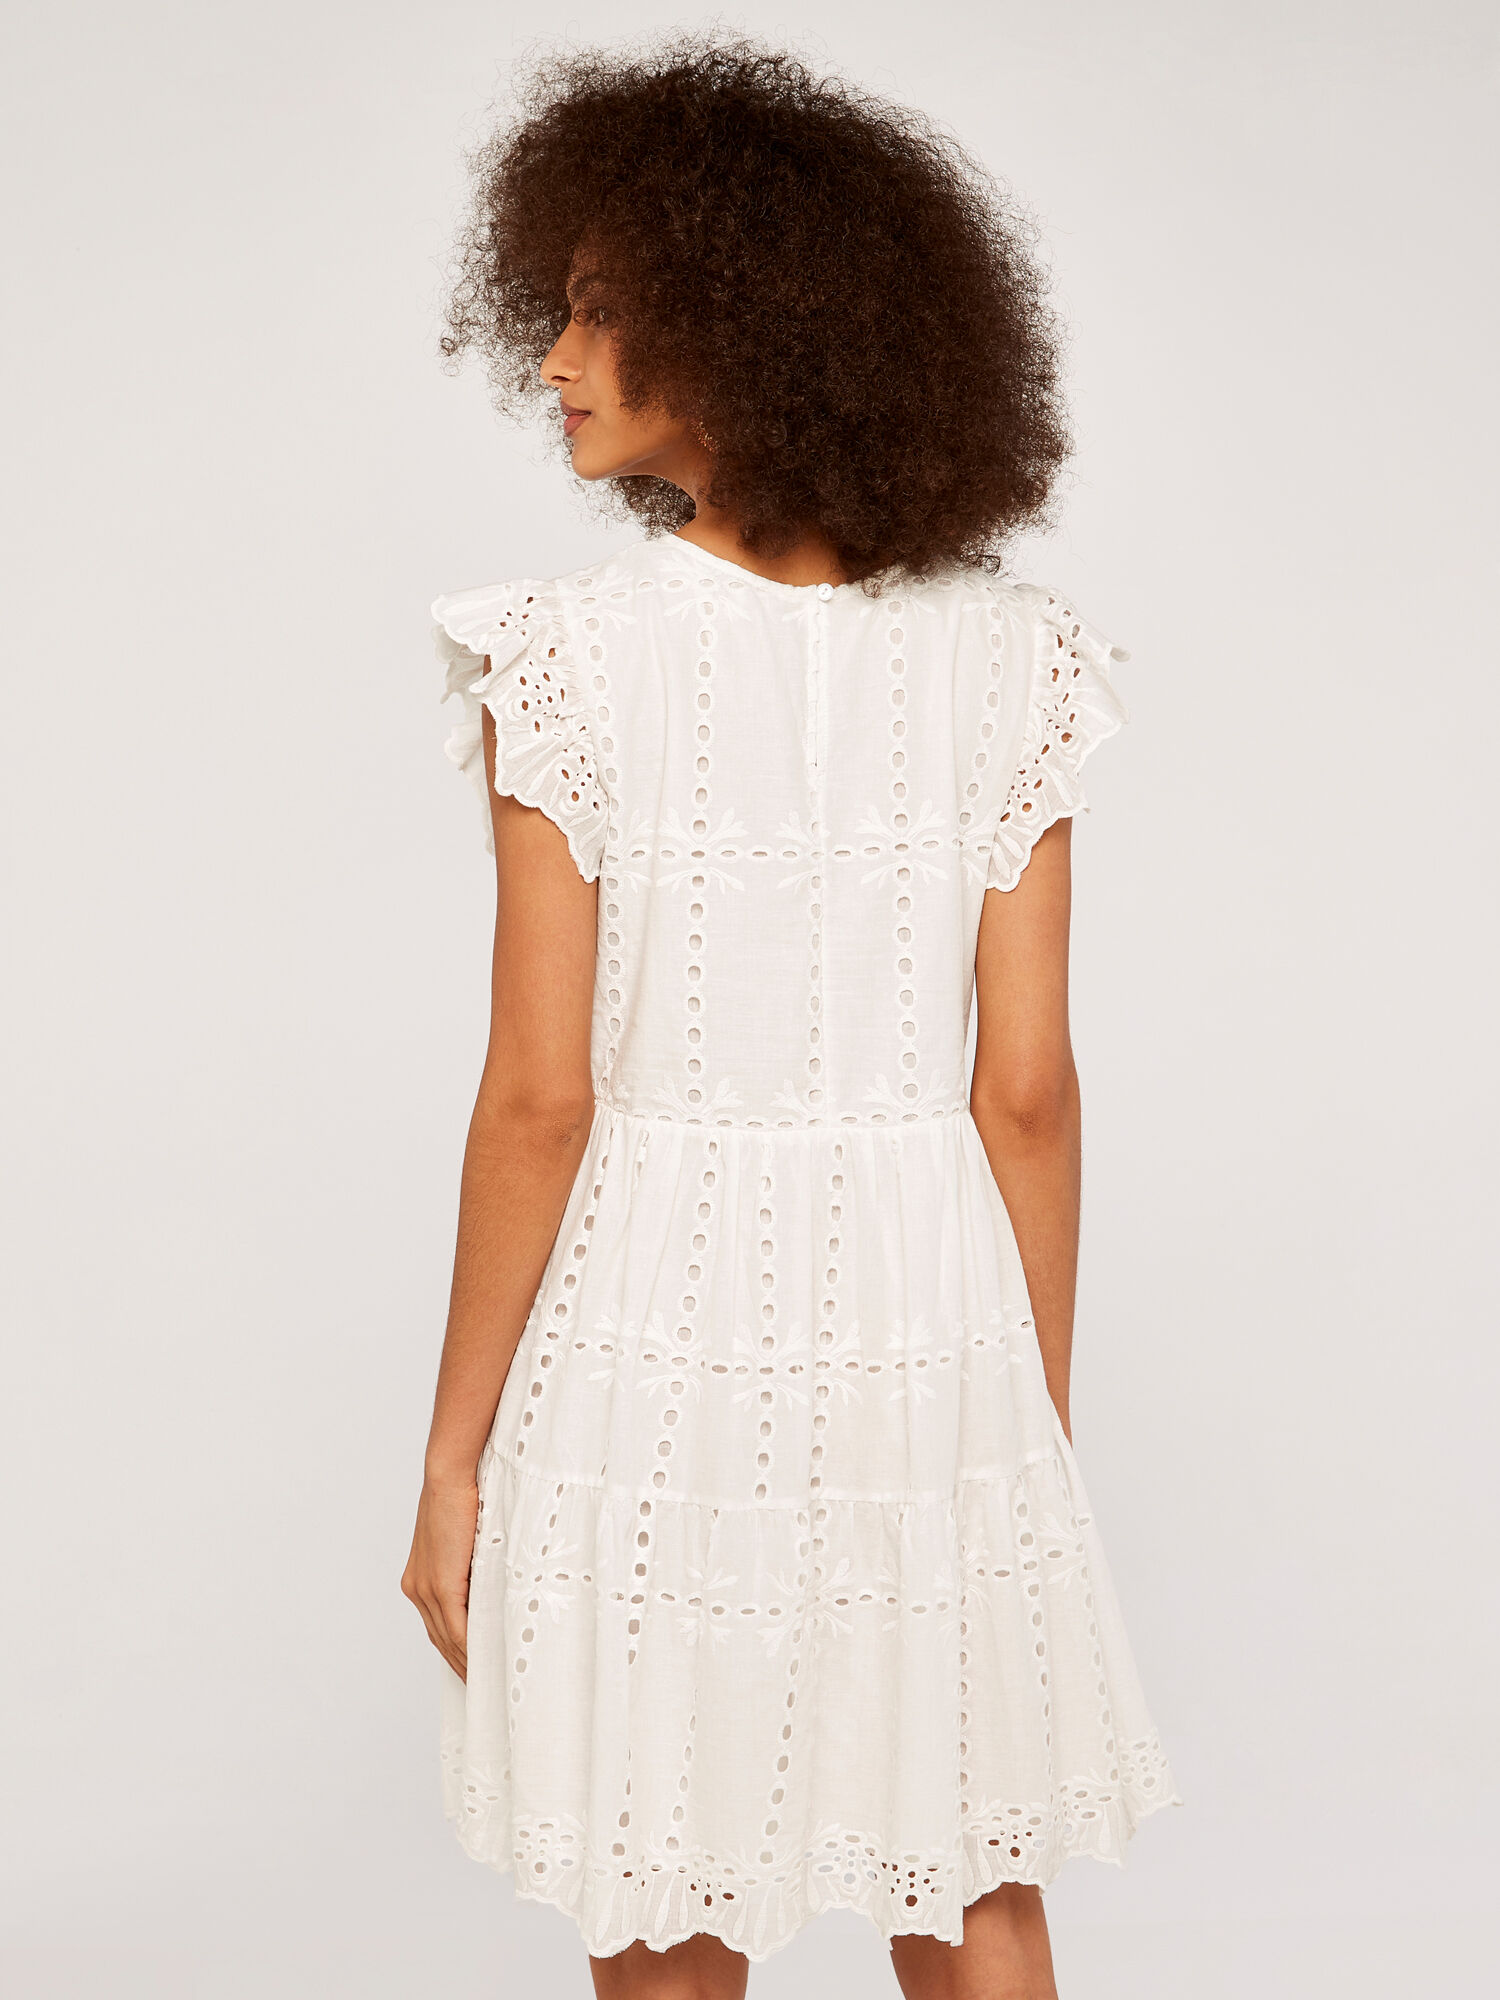 broderie anglaise dress white